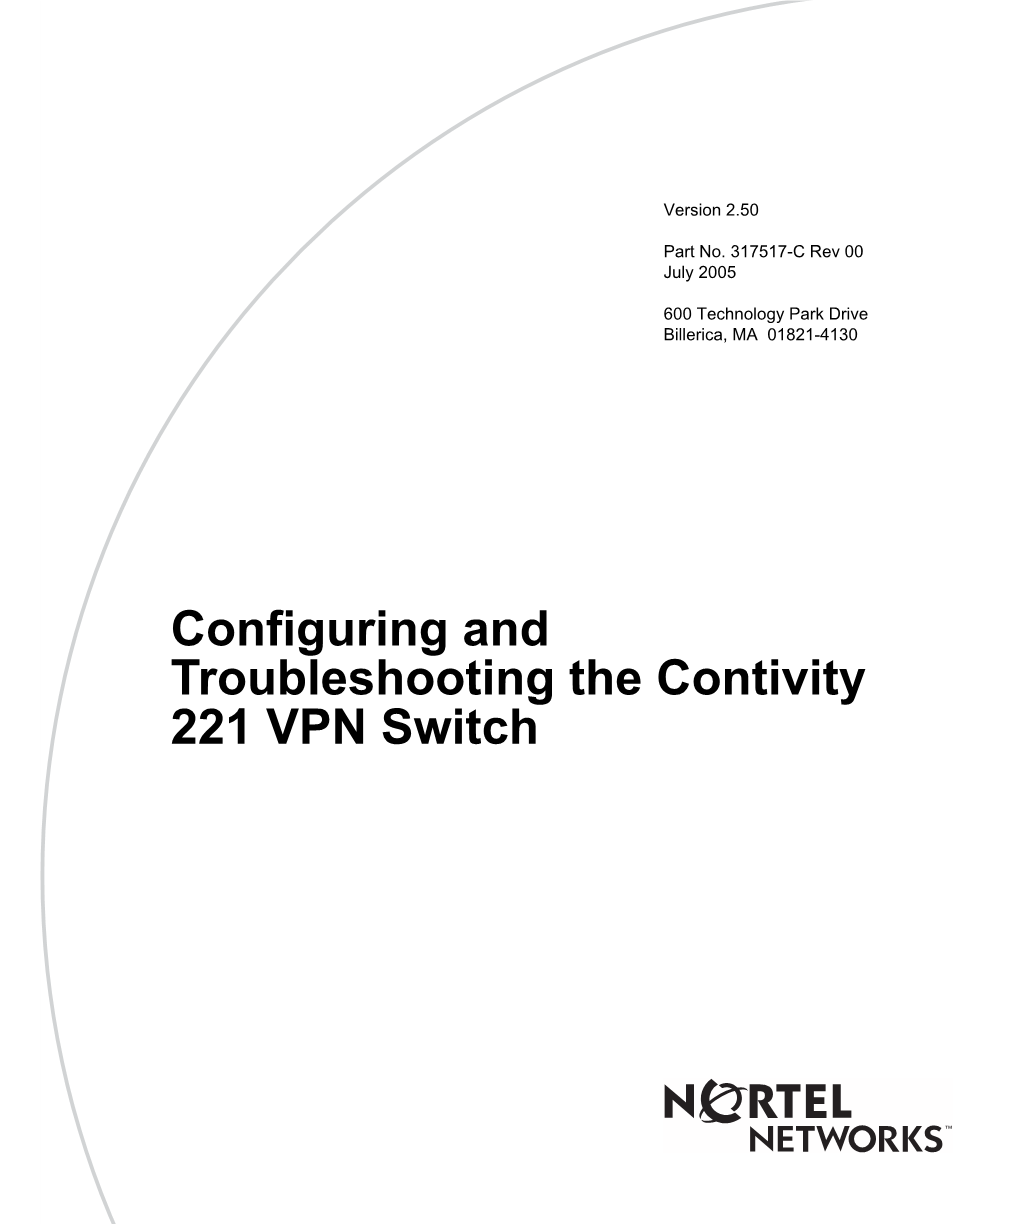 Configuring and Troubleshooting the Contivity 221 VPN Switch 2